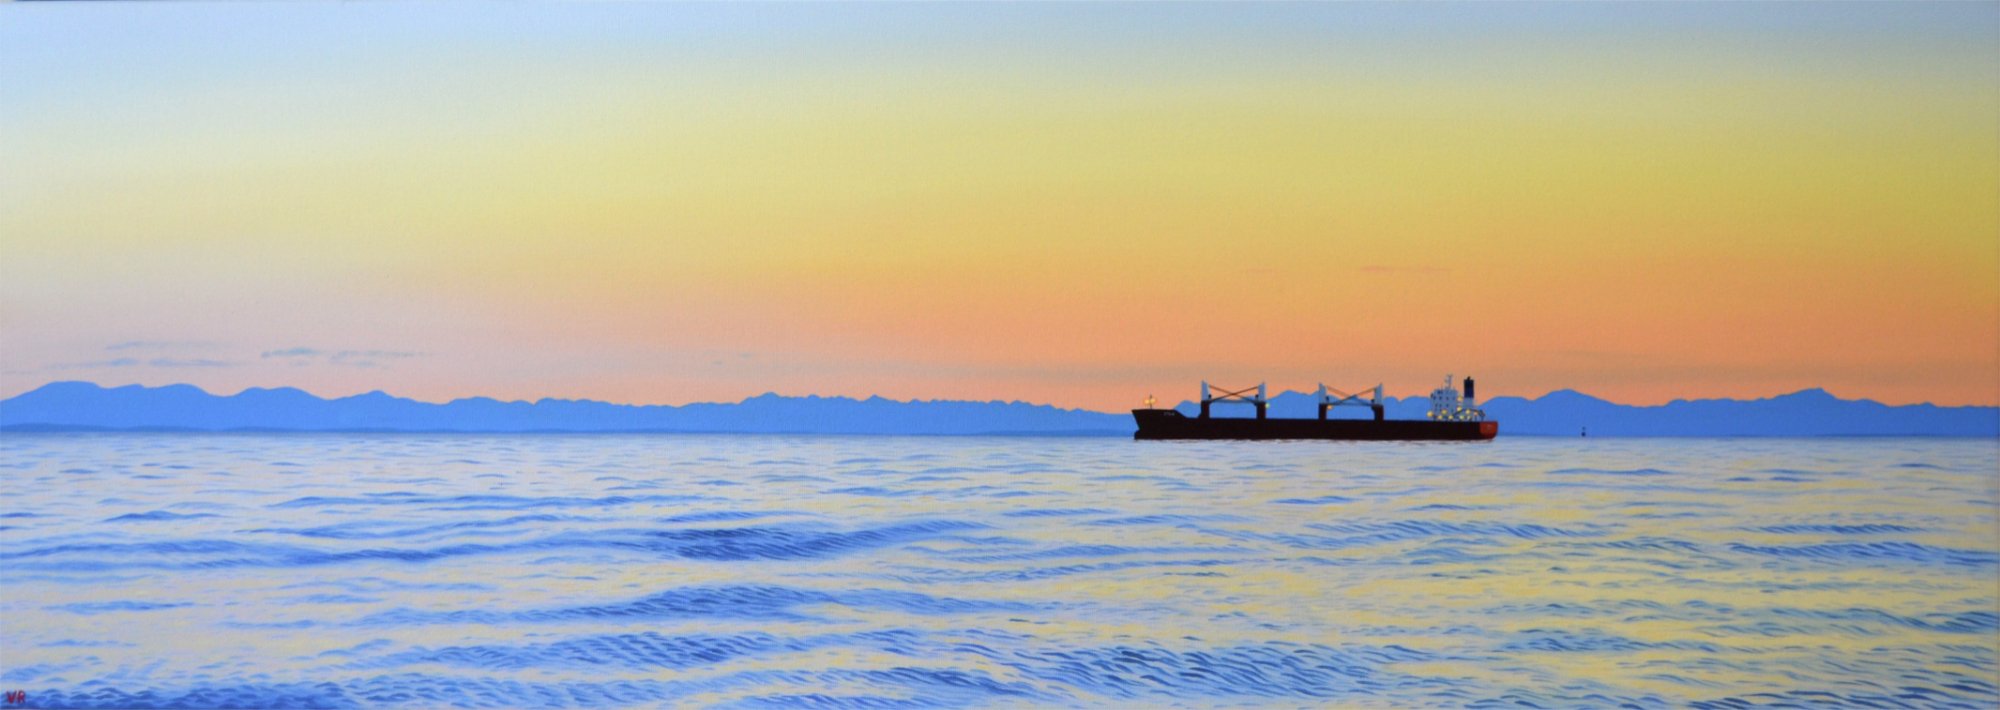   Out to Sea    15x42    acrylic on canvas  